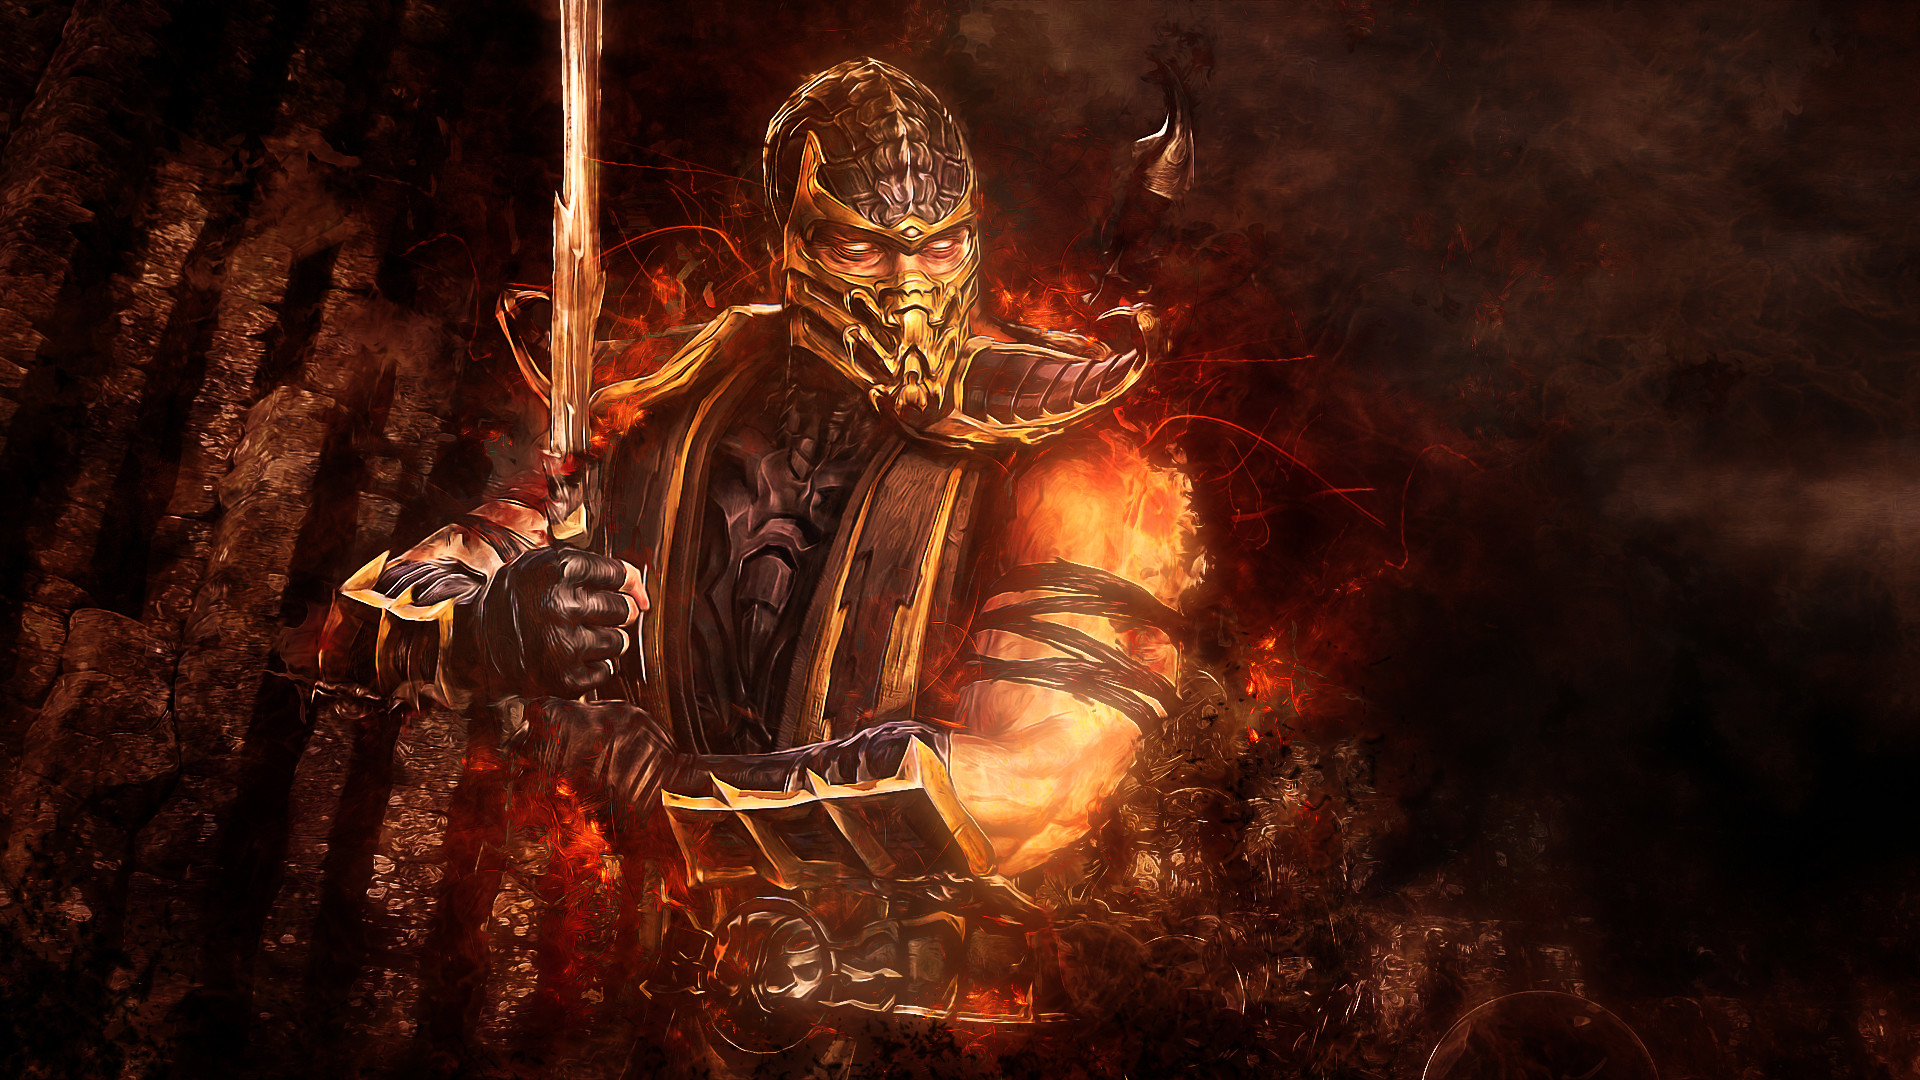 1920x1080 Wallpaper Mortal kombat, Scorpion, Sword, Abstraction, Video game HD,  Picture, Image